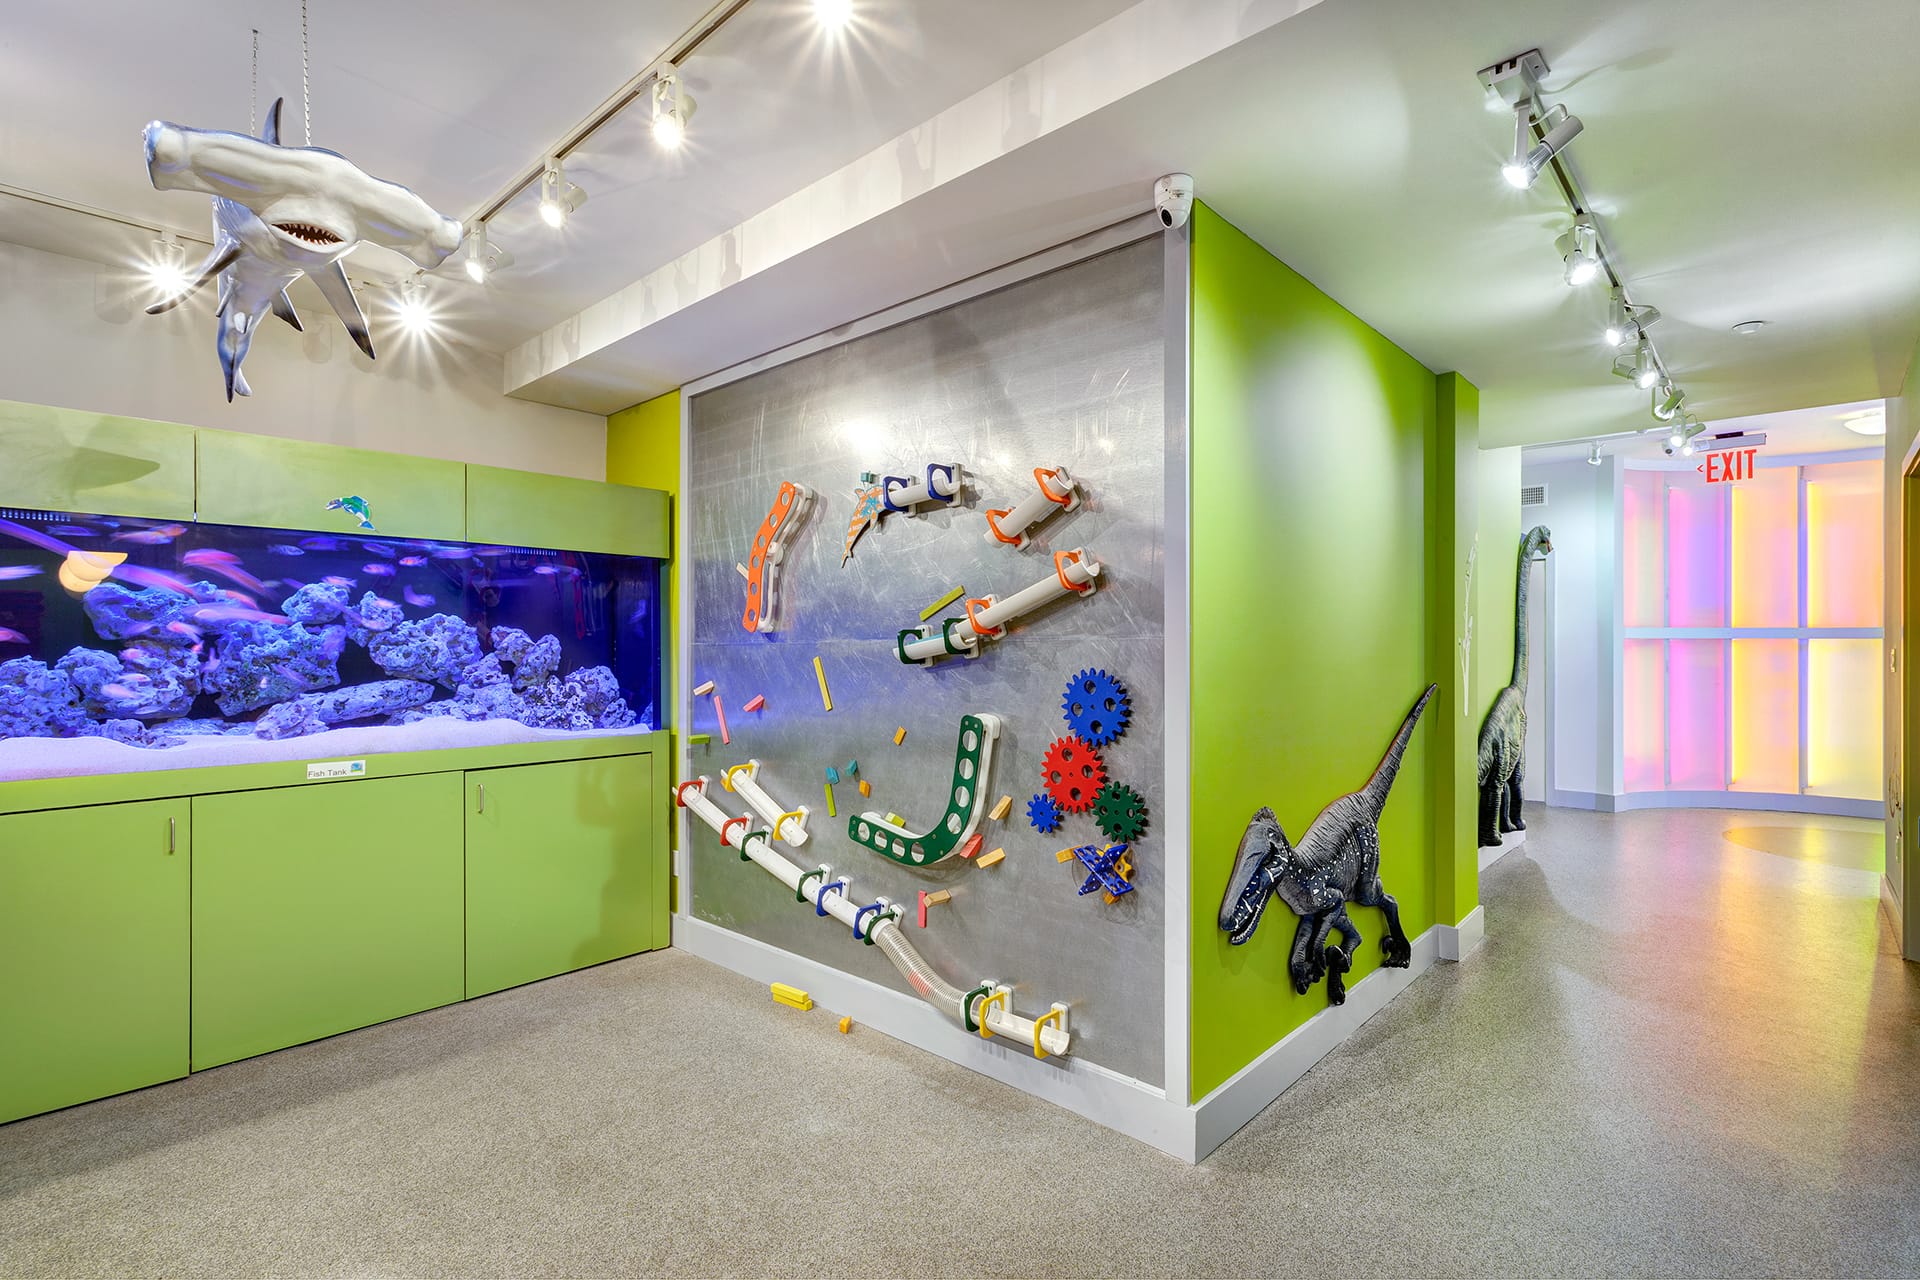 Hallway with magnetic walls, a hammerhead shark model hanging from the ceiling, and a large fish tank.